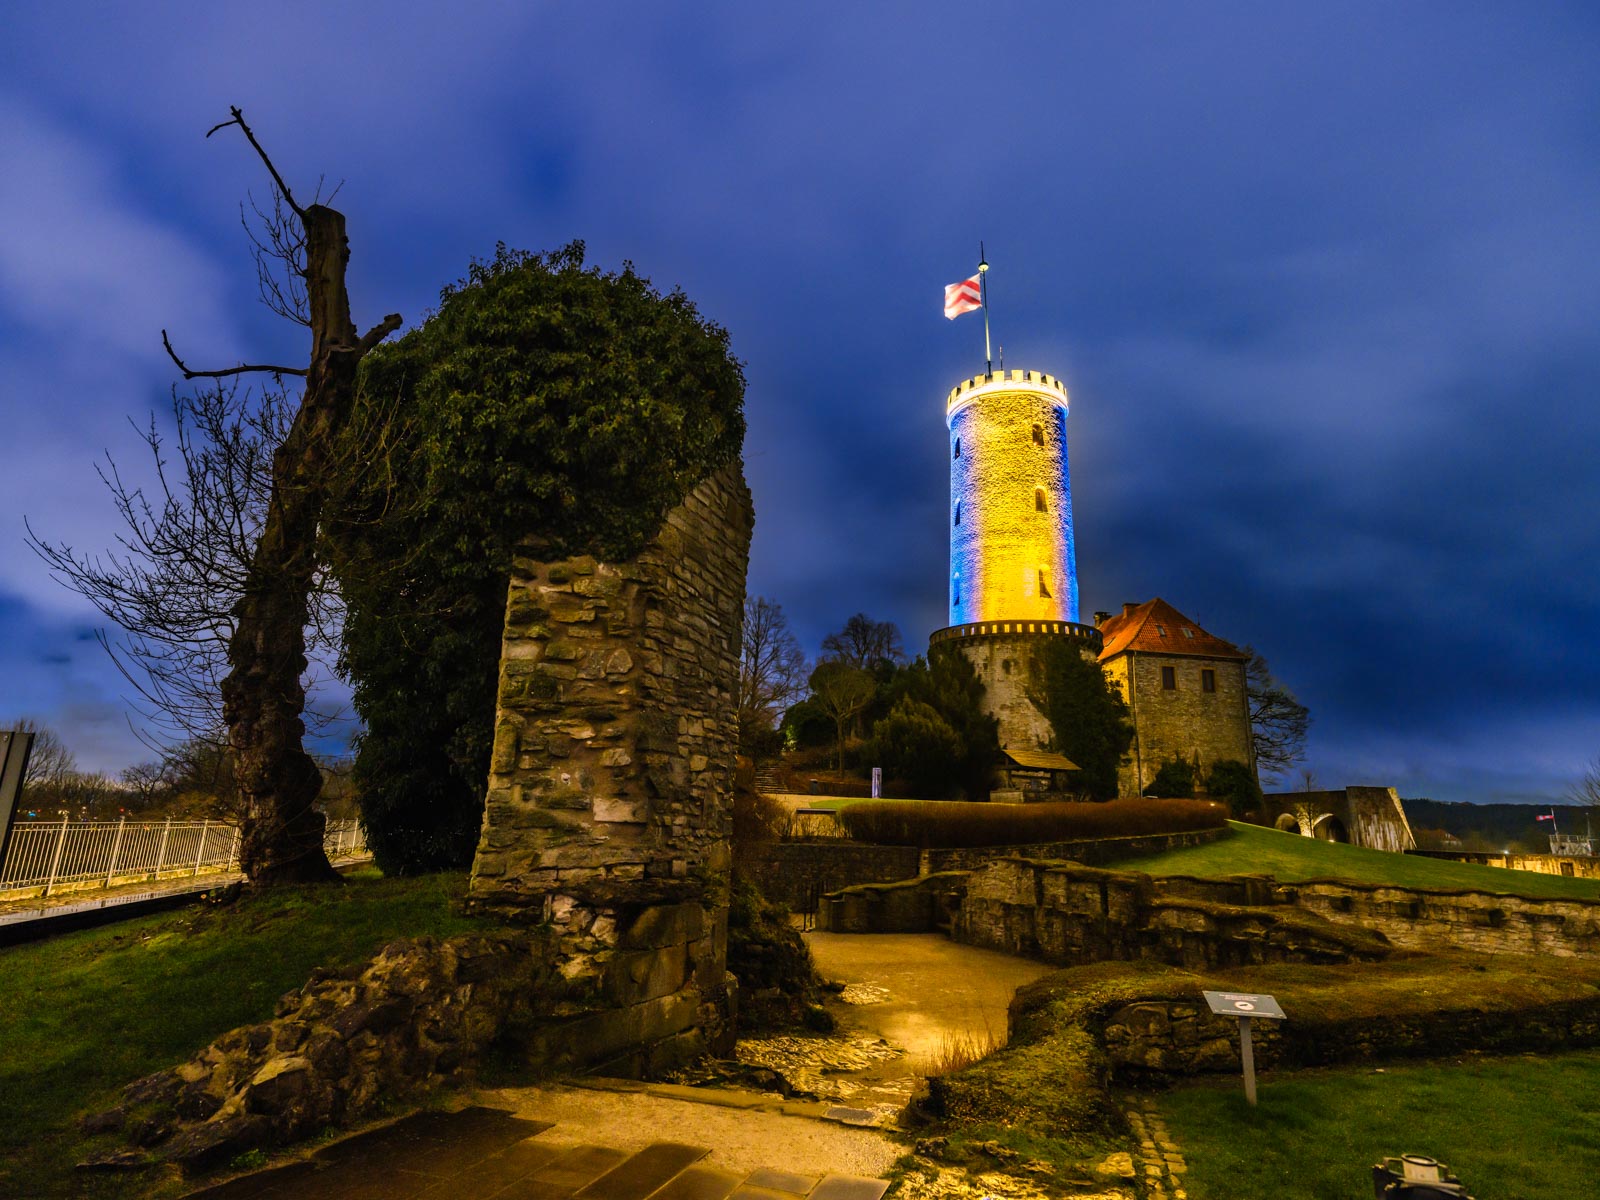 Sparrenburg castle in the evening of February 24, 2022 (Bielefeld, Germany).